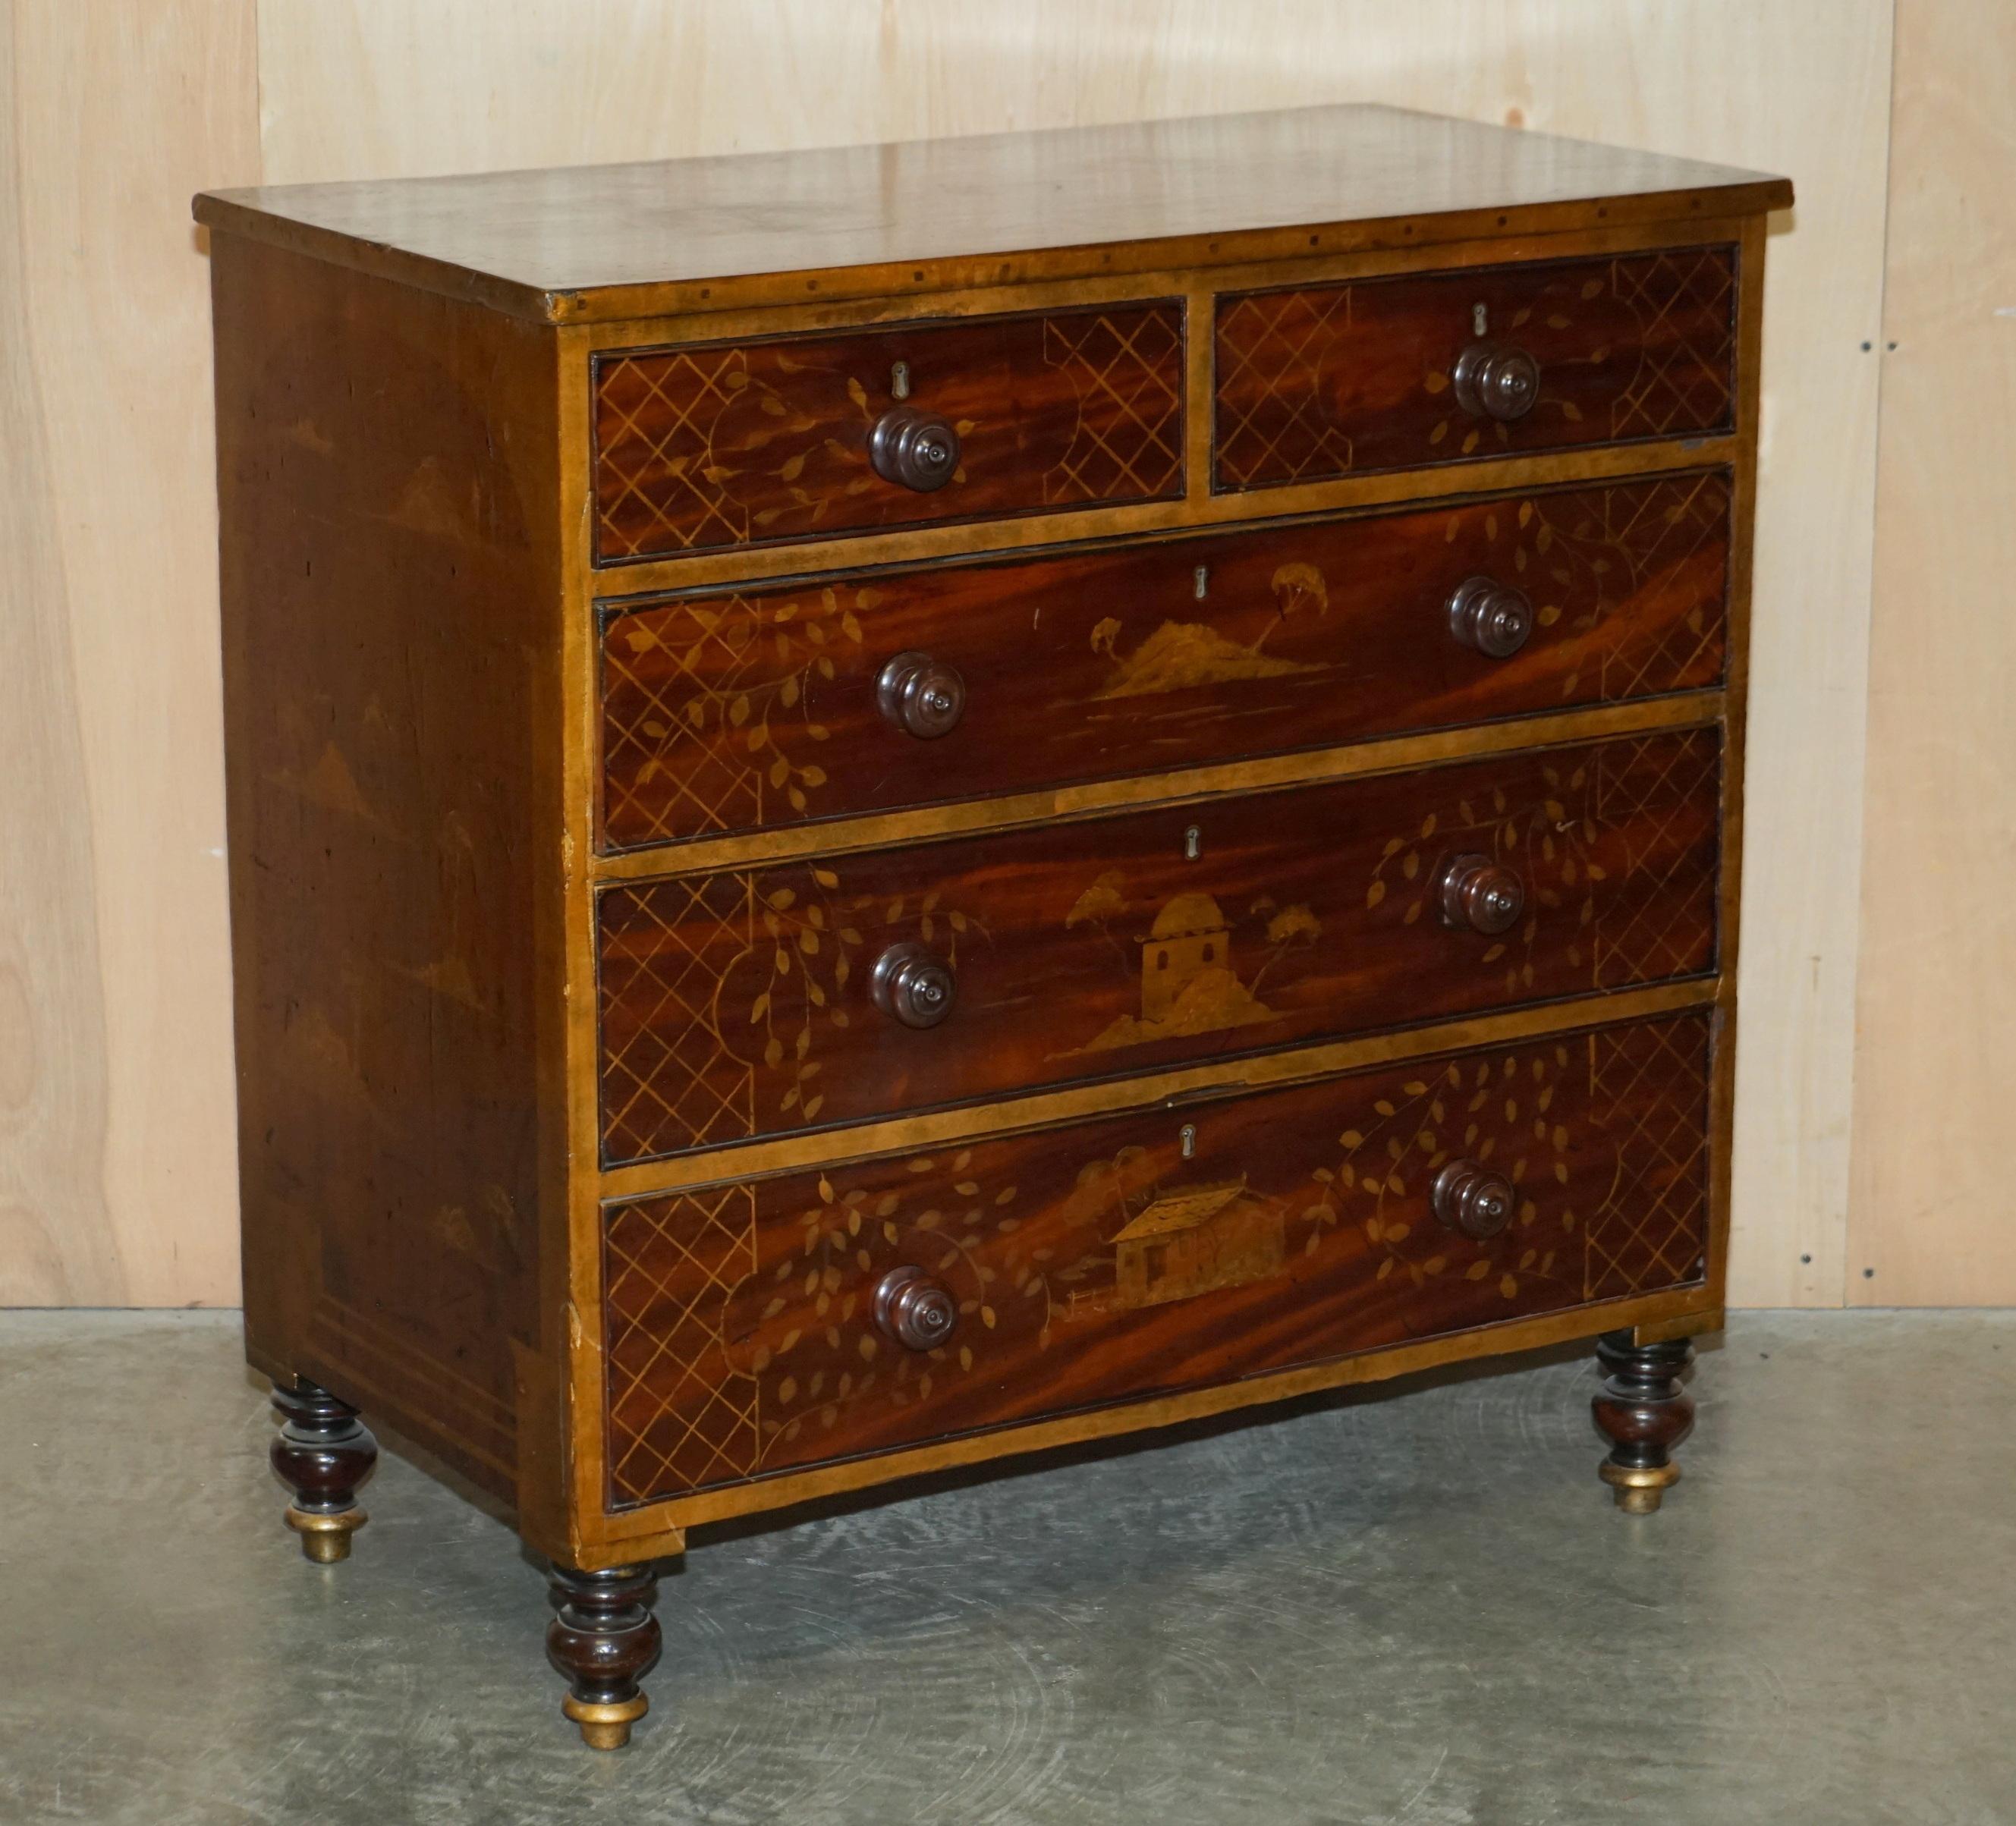 We are delighted to offer for sale this stunning original circa 1860-1880 Chinese hand painted with Pagoda's oak chest of drawers

This chest of drawers is just about as lovely a piece of Chinoiserie furniture as you will ever see, the painting is